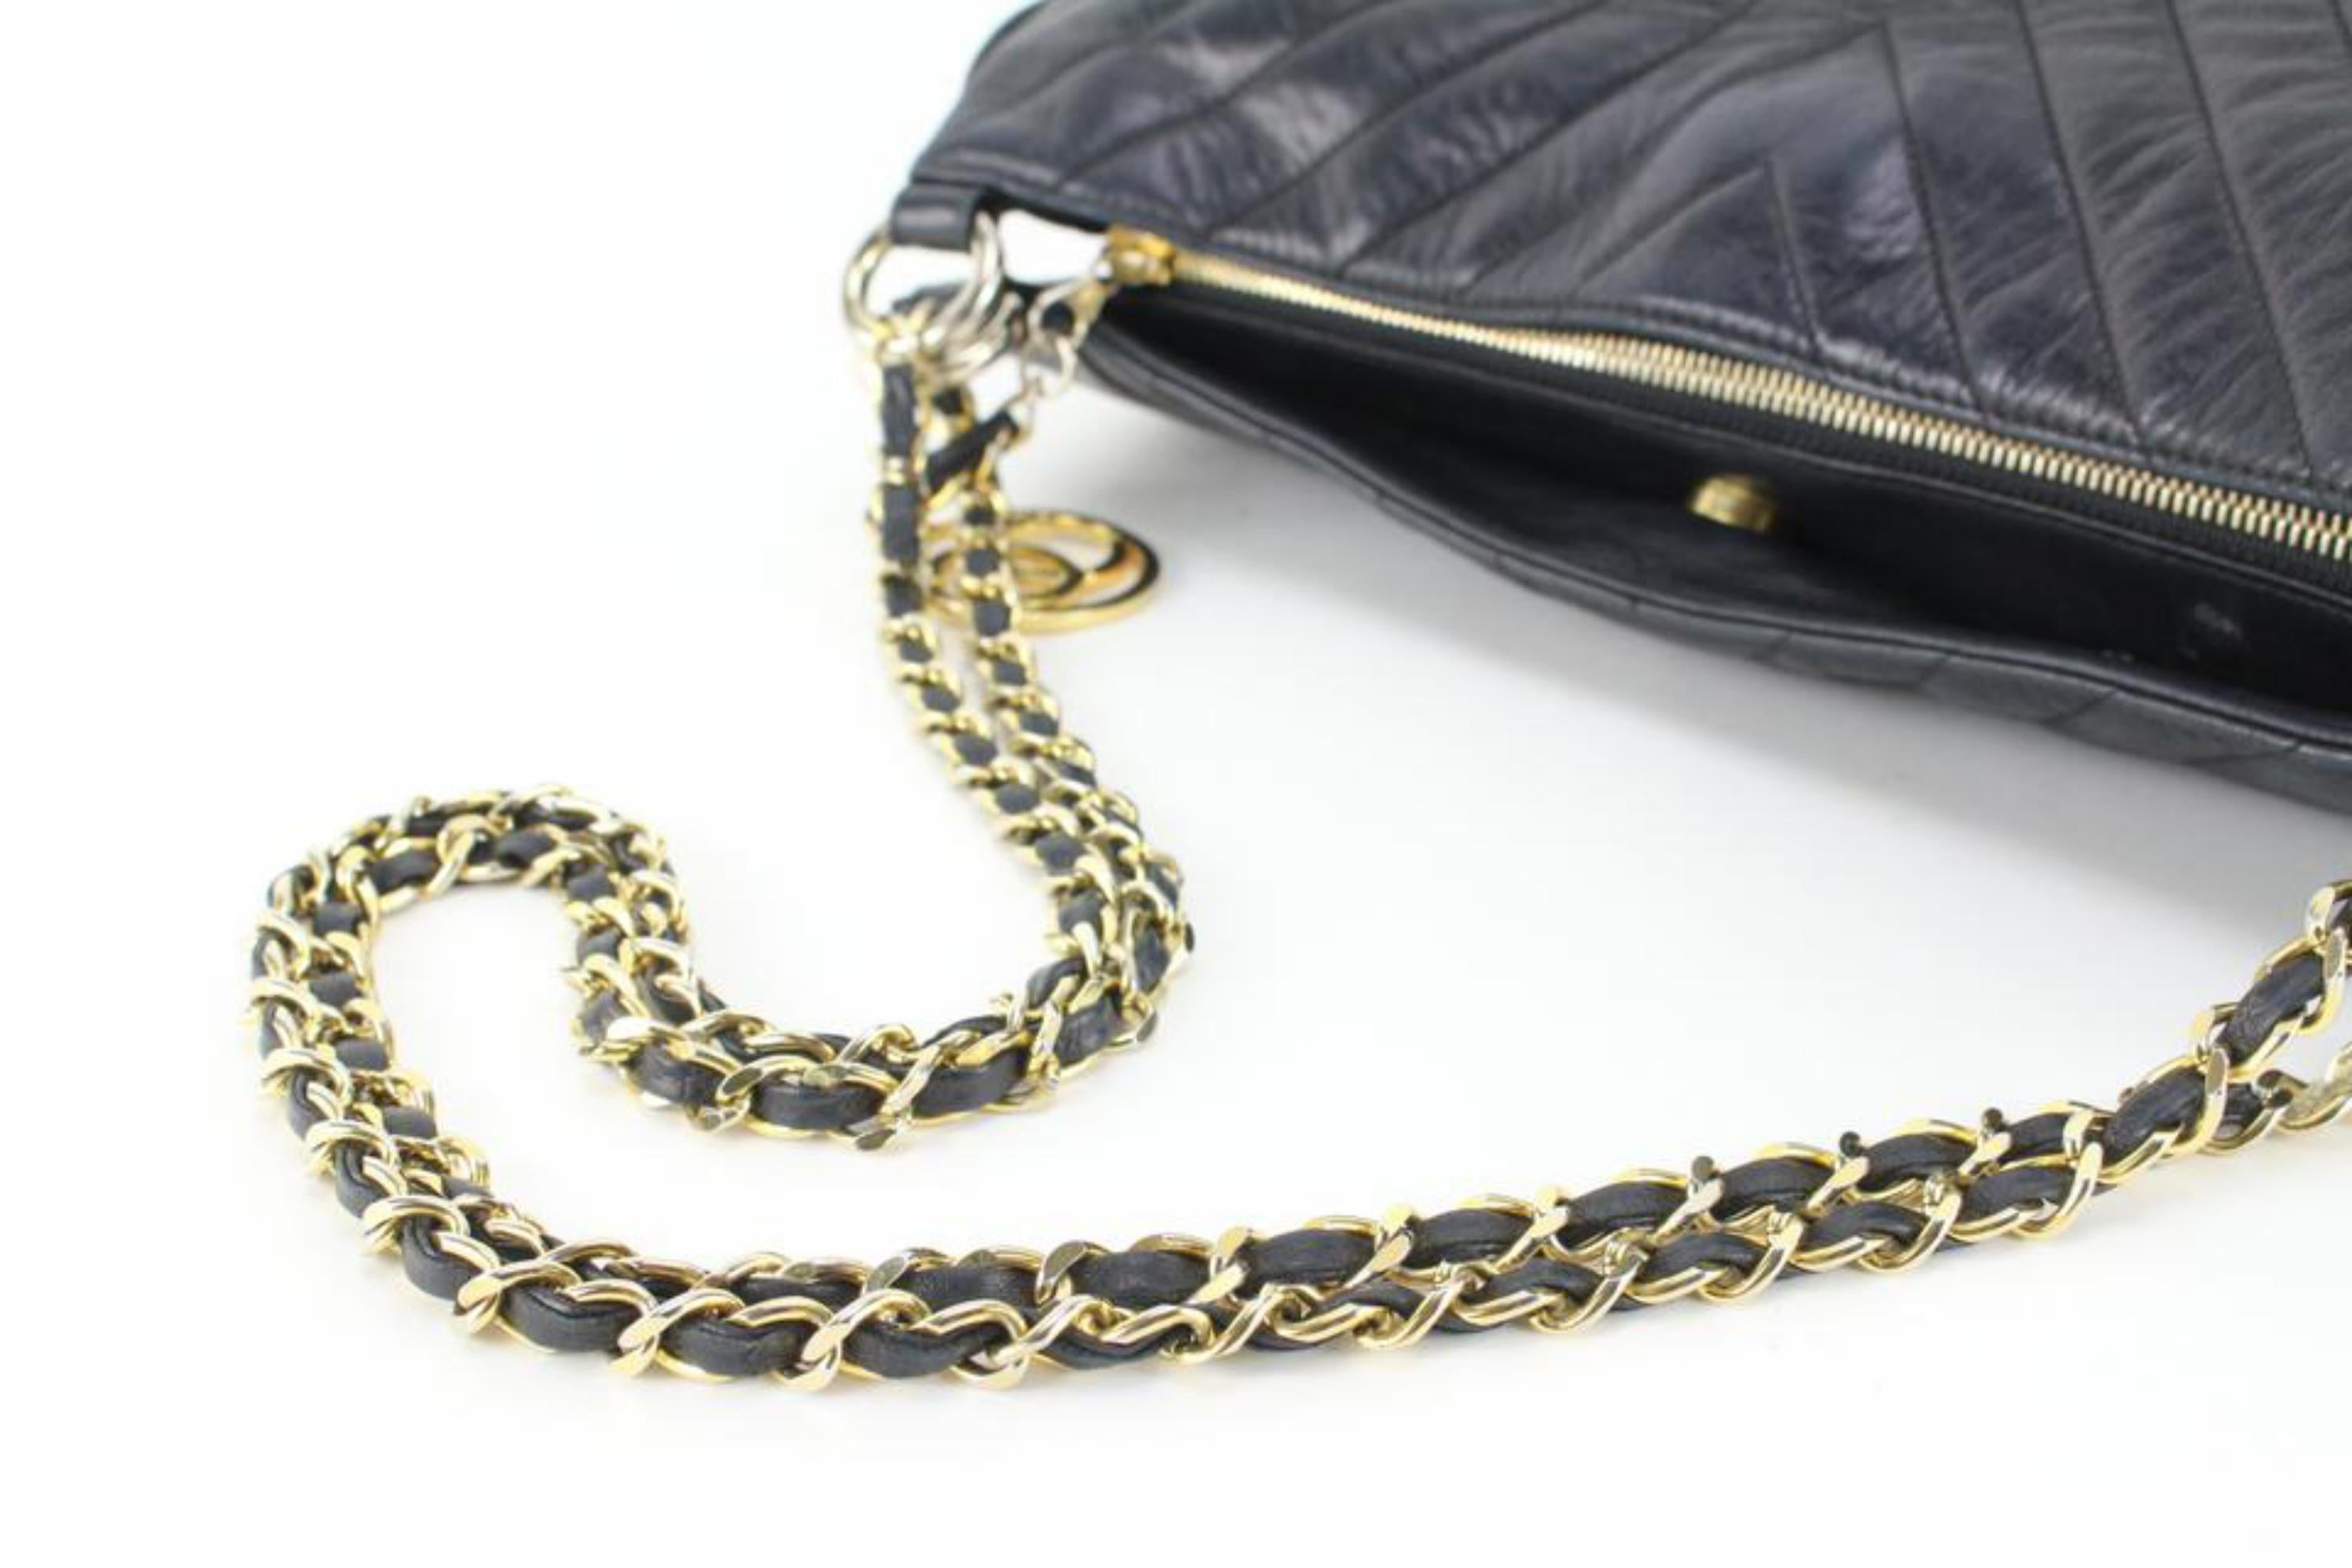 Chanel Quilted Chevron Lambskin Chain Shoulder Bag 60ck816s